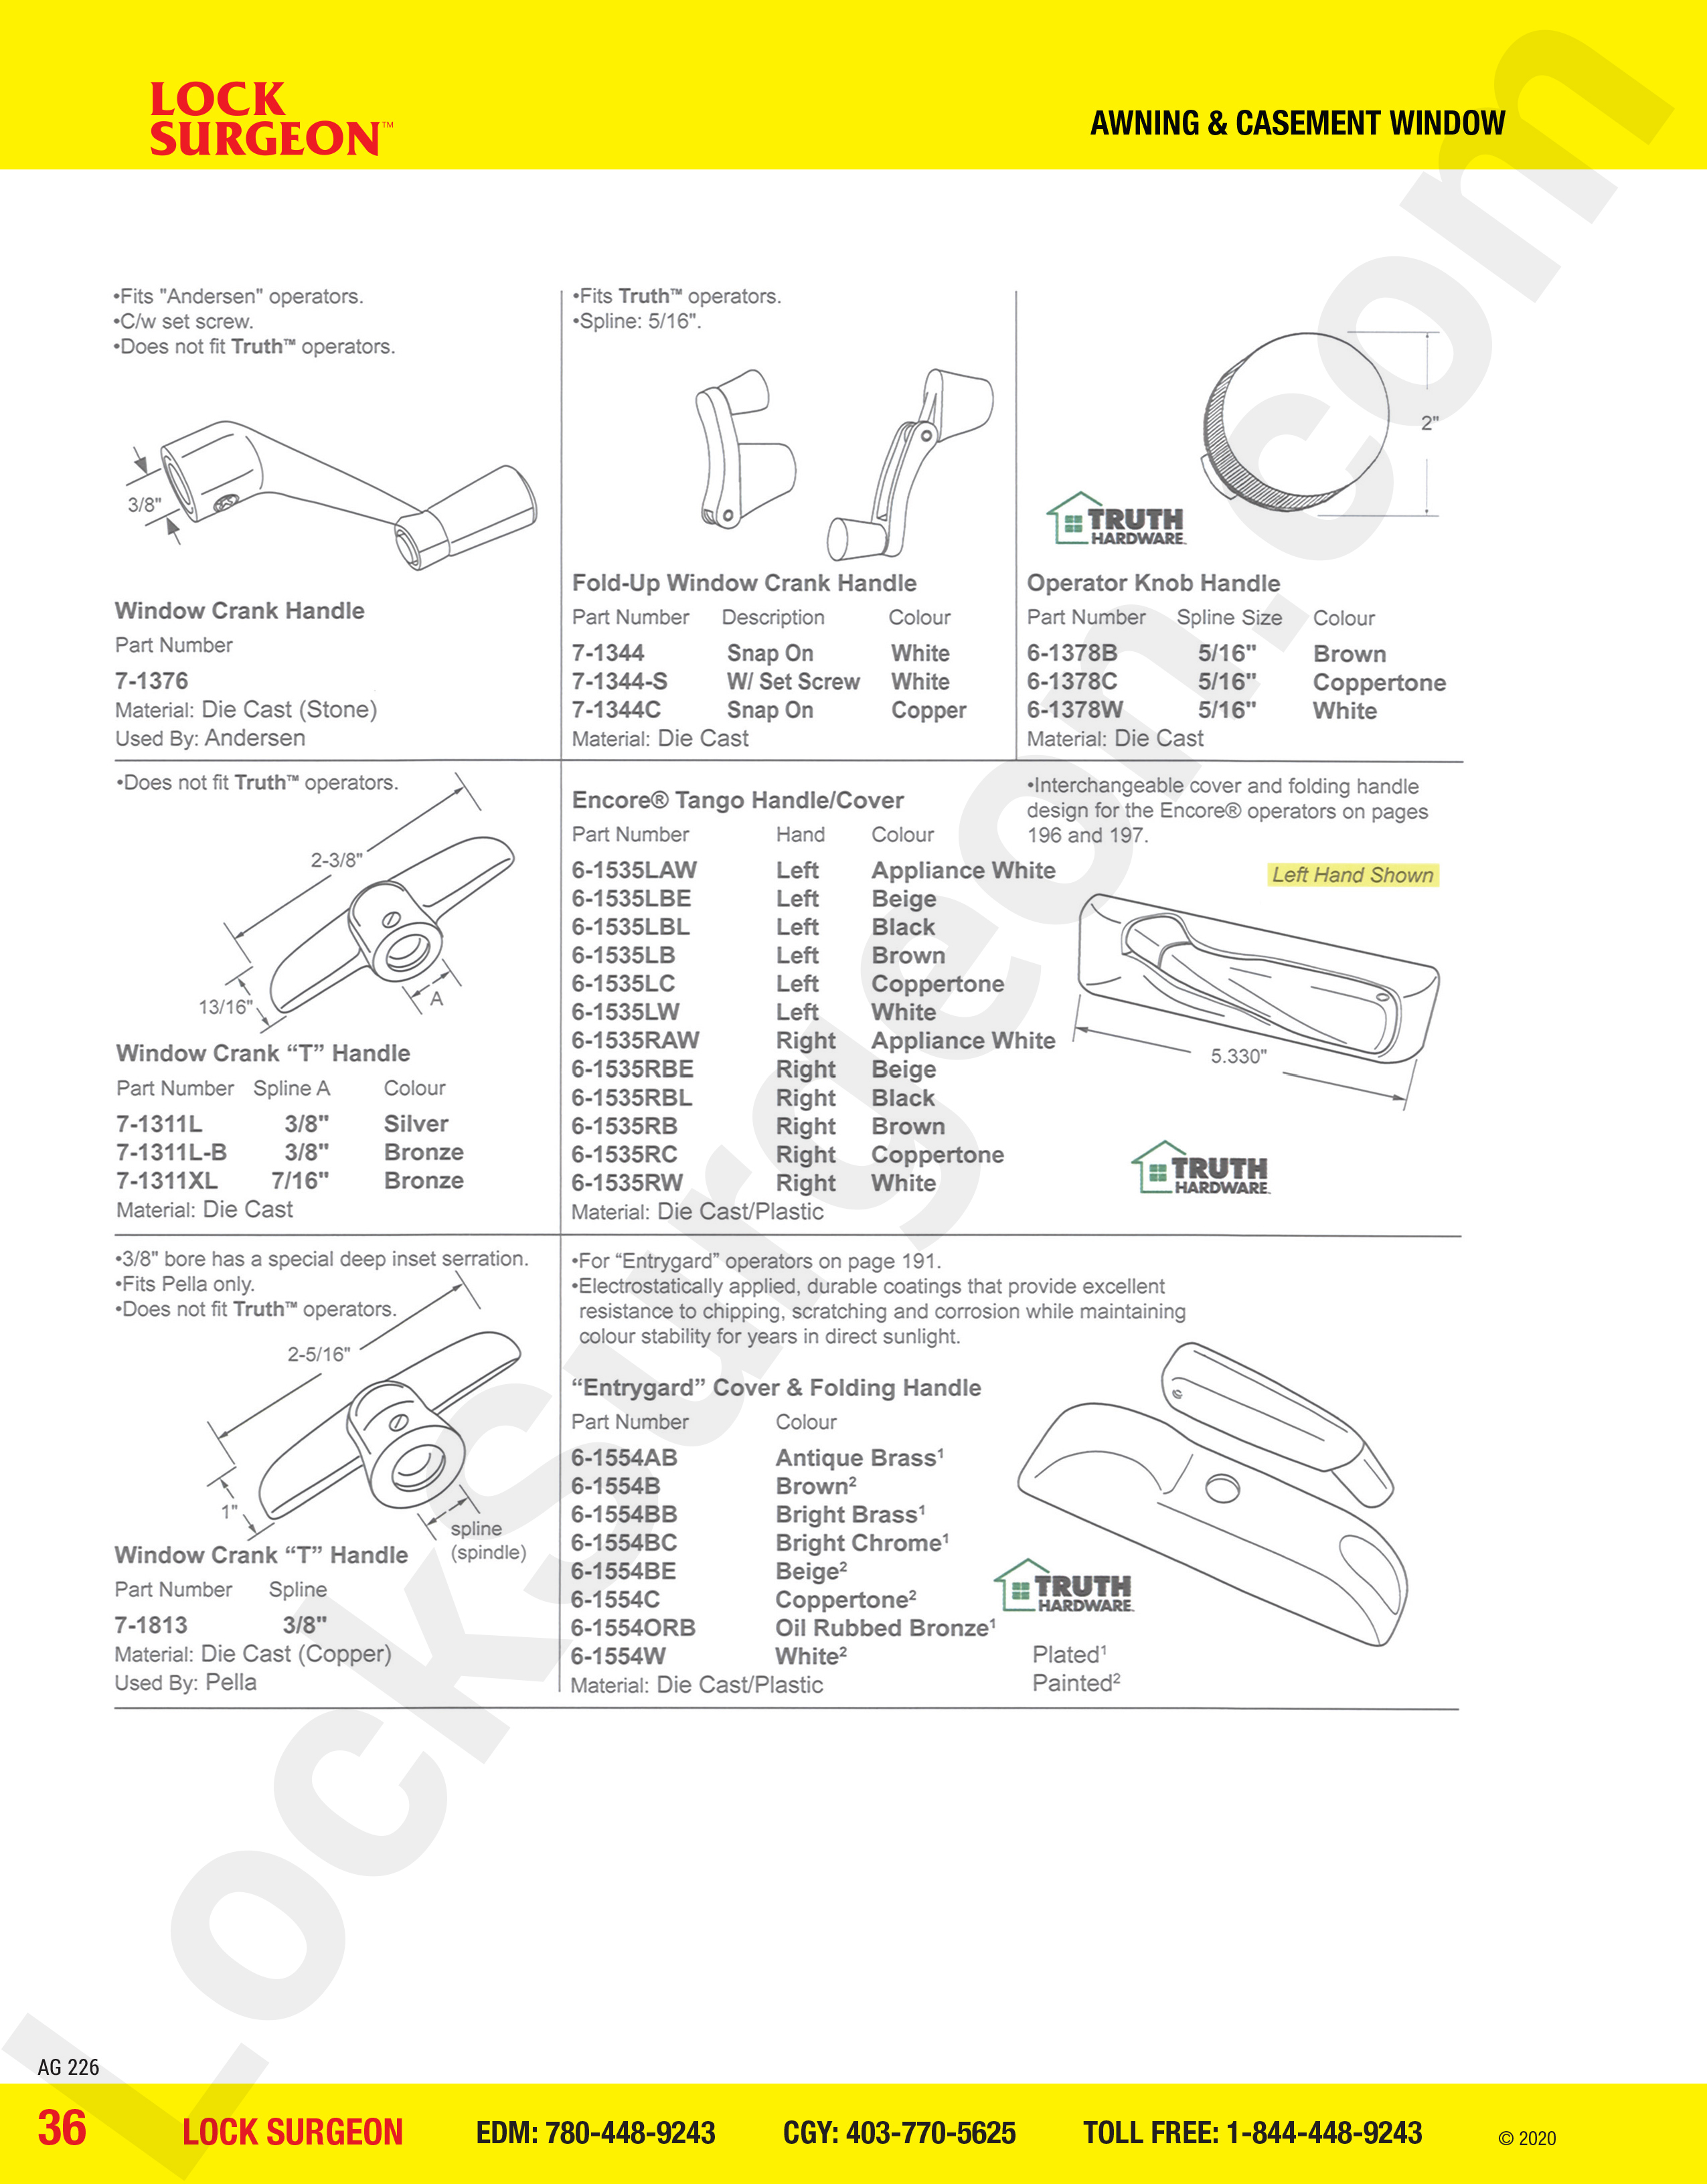 awning & casement window parts for Anderson, Truth Hardware, Encore & Pella crank handles.